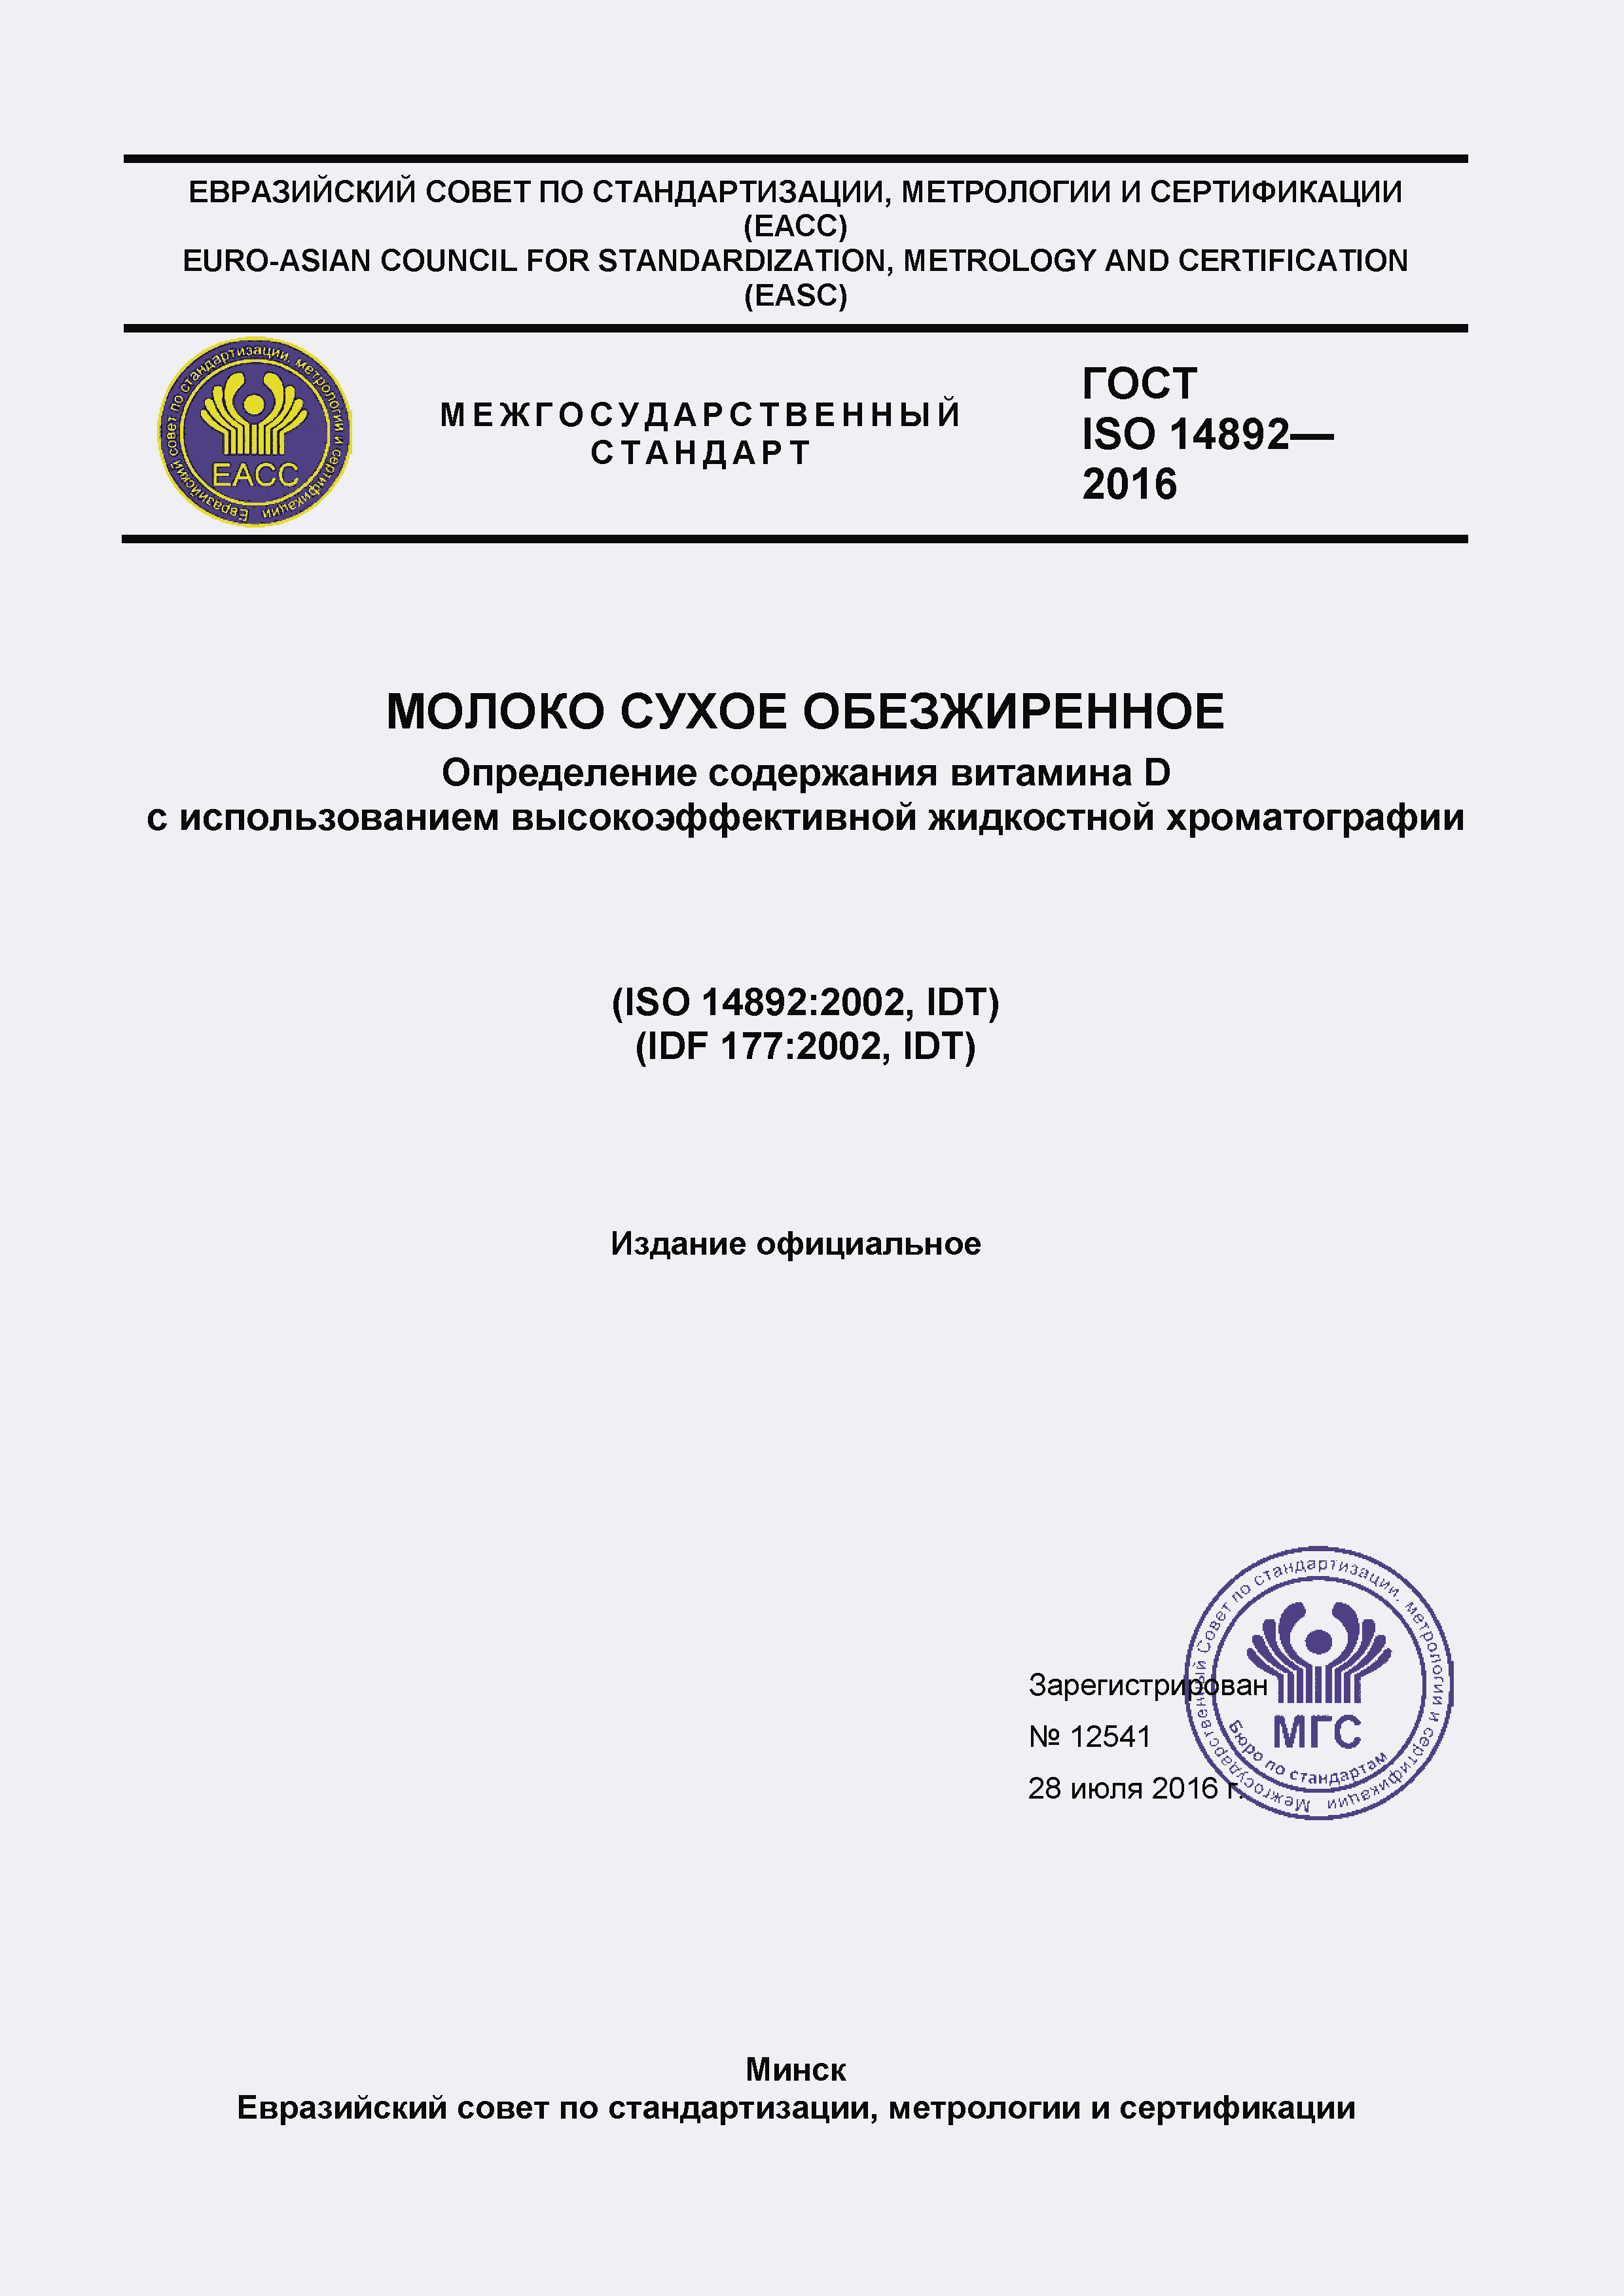  ISO 14892-2016.  1